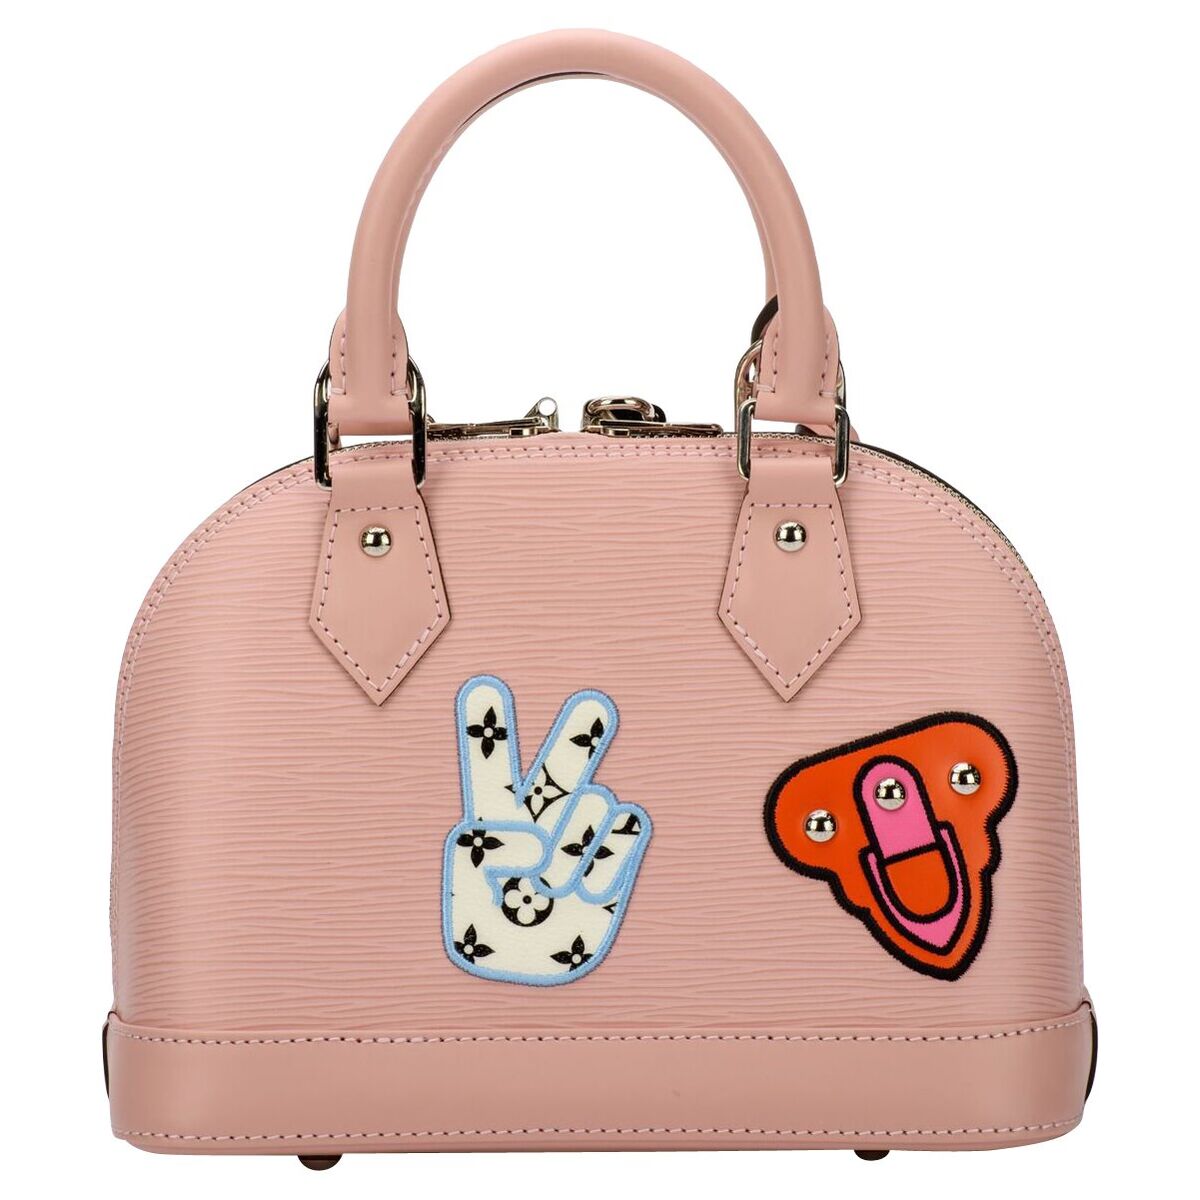 New in Box Louis Vuitton Limited Edition Pink Alma Stickers  Louis vuitton  handbags, Louis vuitton limited edition, Louis vuitton alma